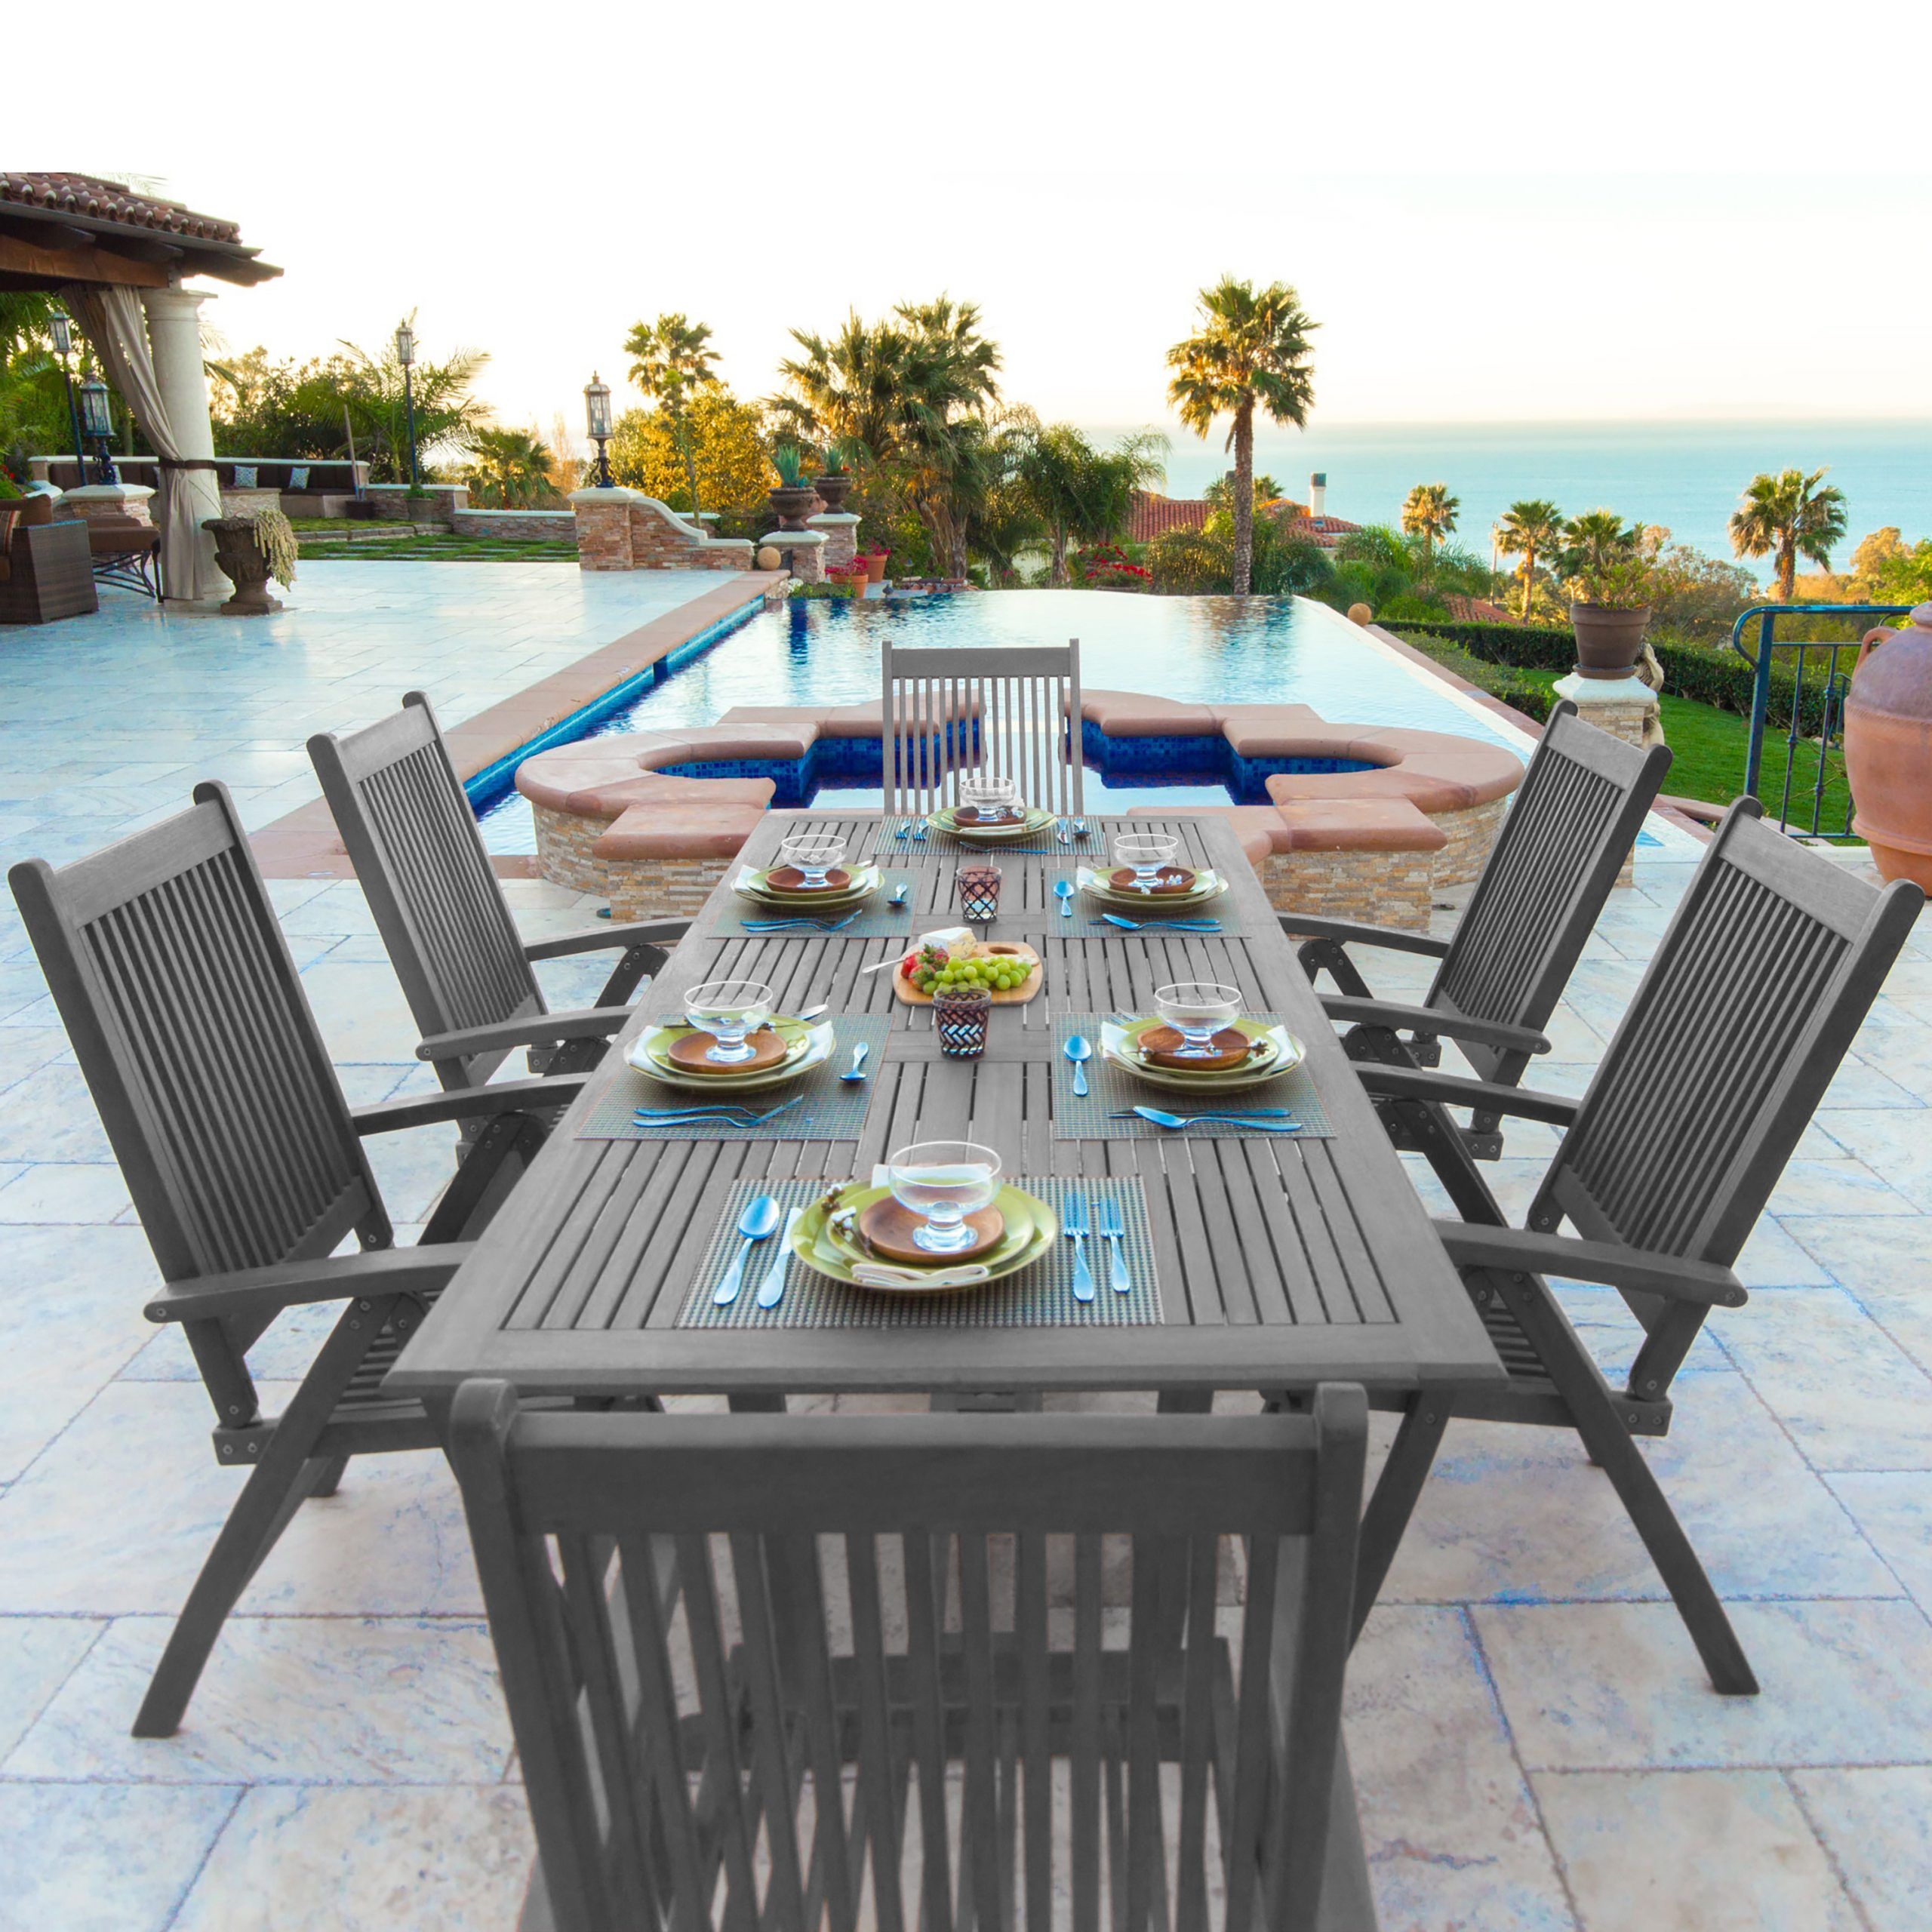 Extendable 7 Piece Patio Dining Sets For Most Up To Date Renaissance Outdoor Patio Hand Scraped Wood 7 Piece Dining Set With (View 2 of 15)